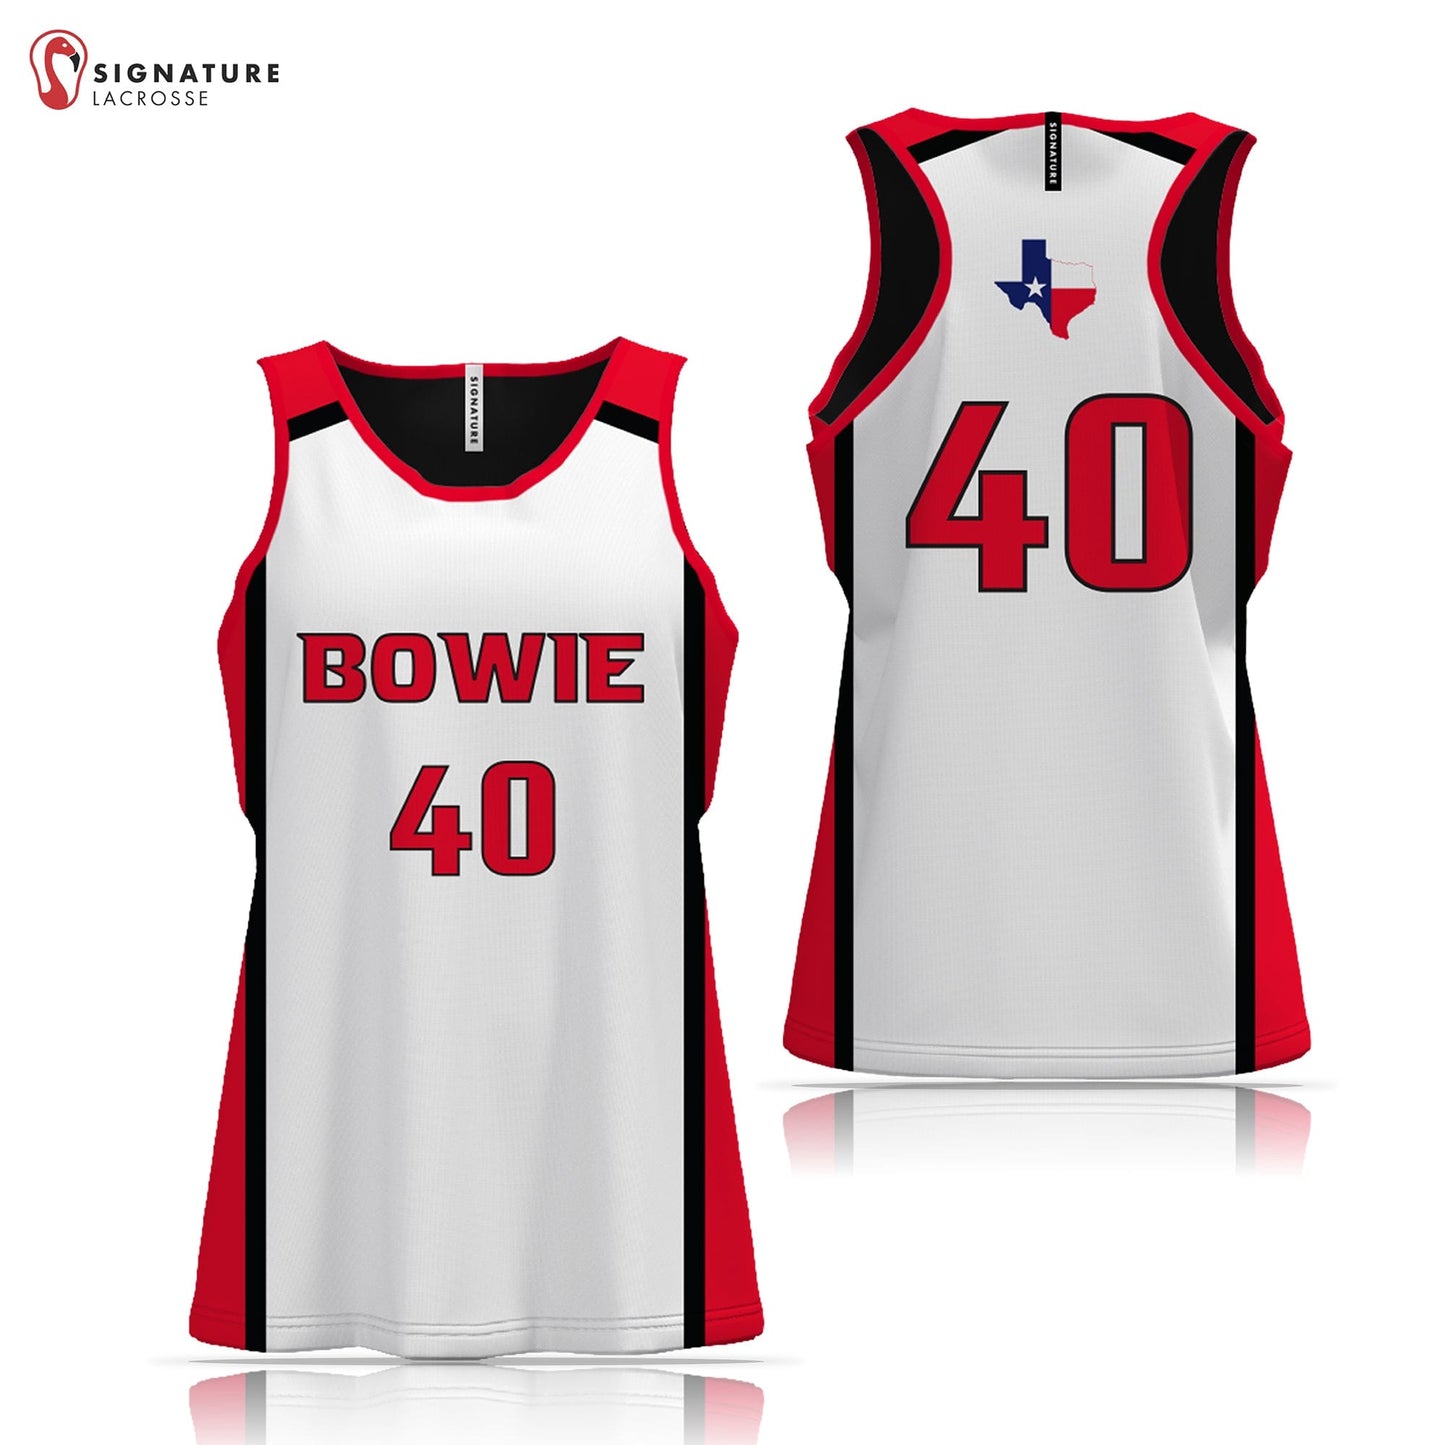 Bowie Youth Lacrosse Women's 3 Piece Game Package Signature Lacrosse